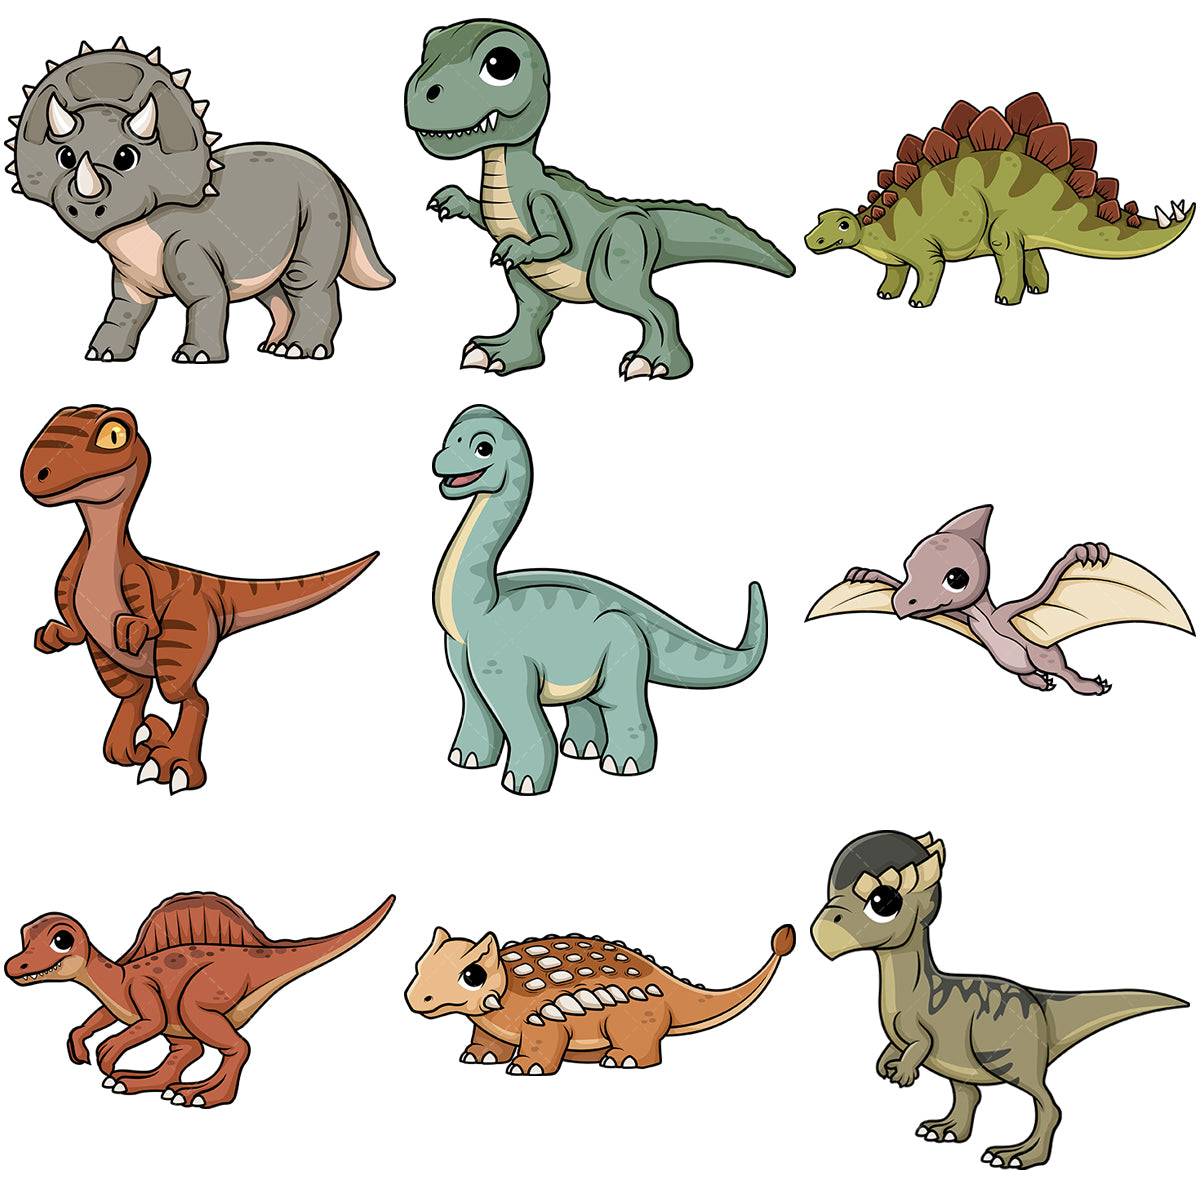 A bundle of 9 royalty-free stock vector illustrations of cute dinosaurs.